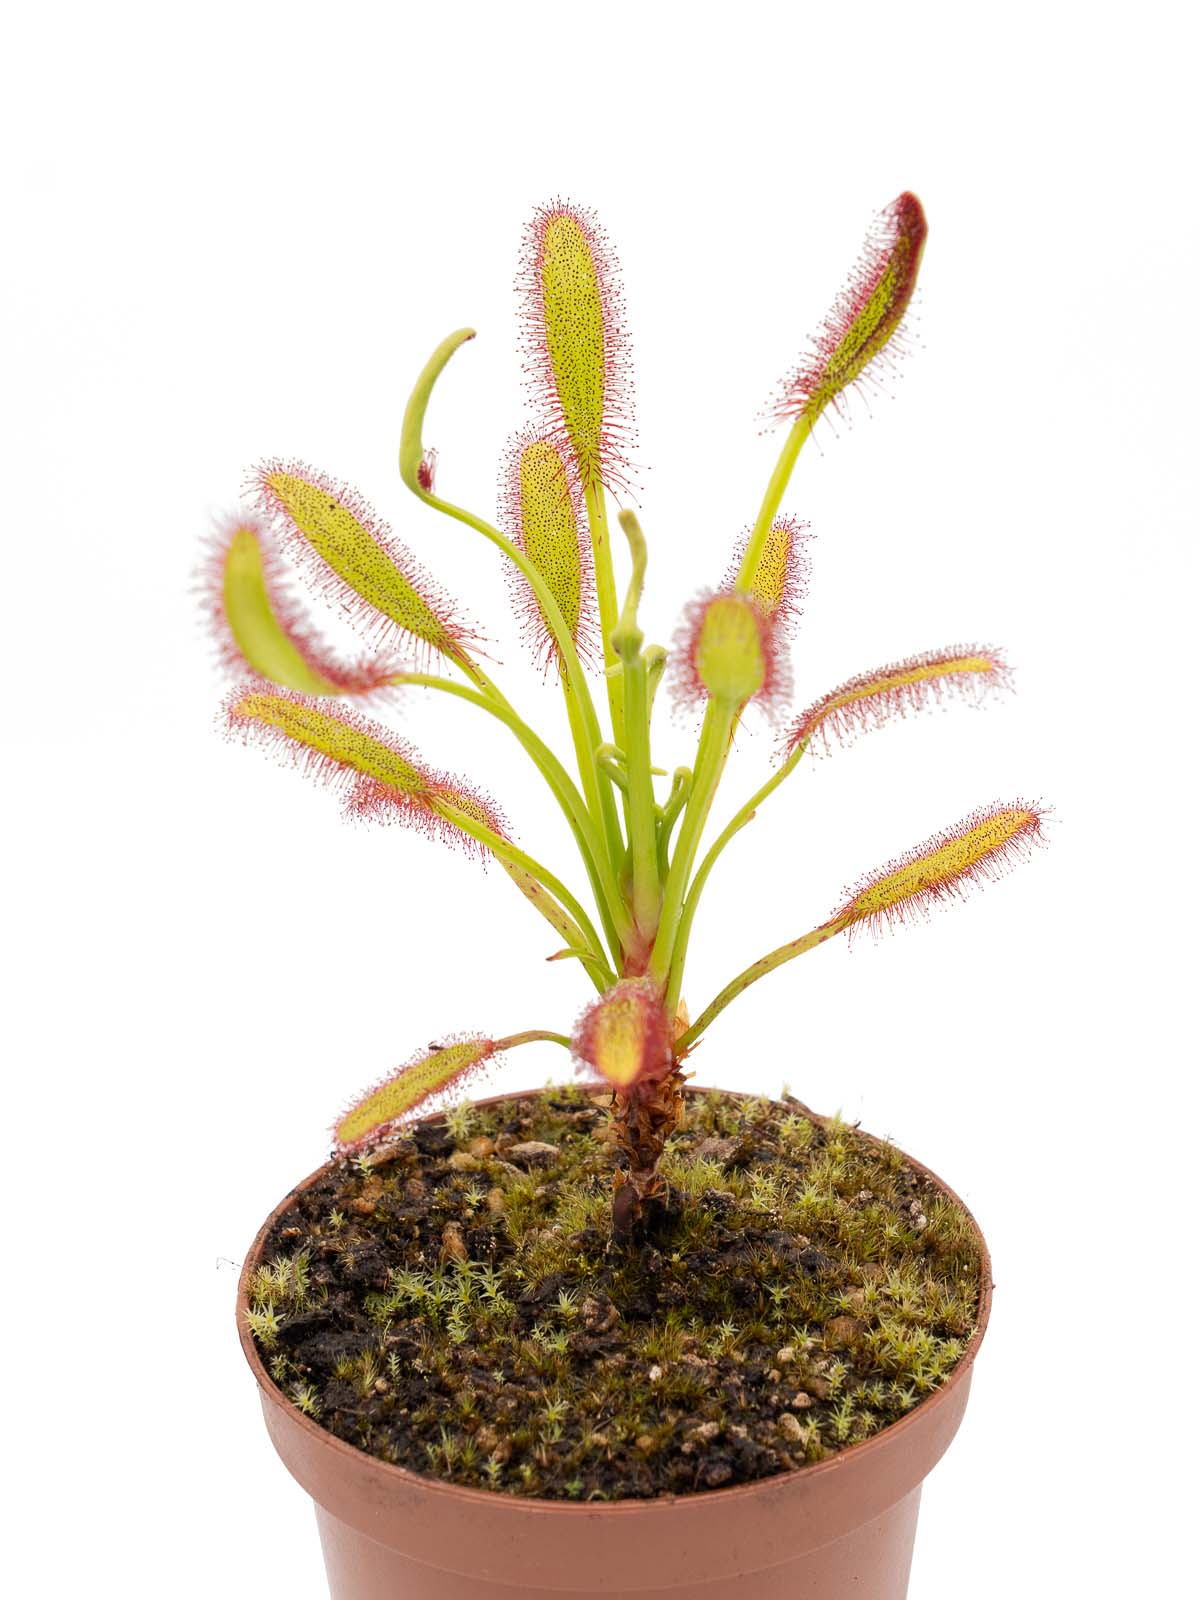 Drosera capensis - directly from Drosera regia location, Bain´s Kloof, Western Cape, South Africa